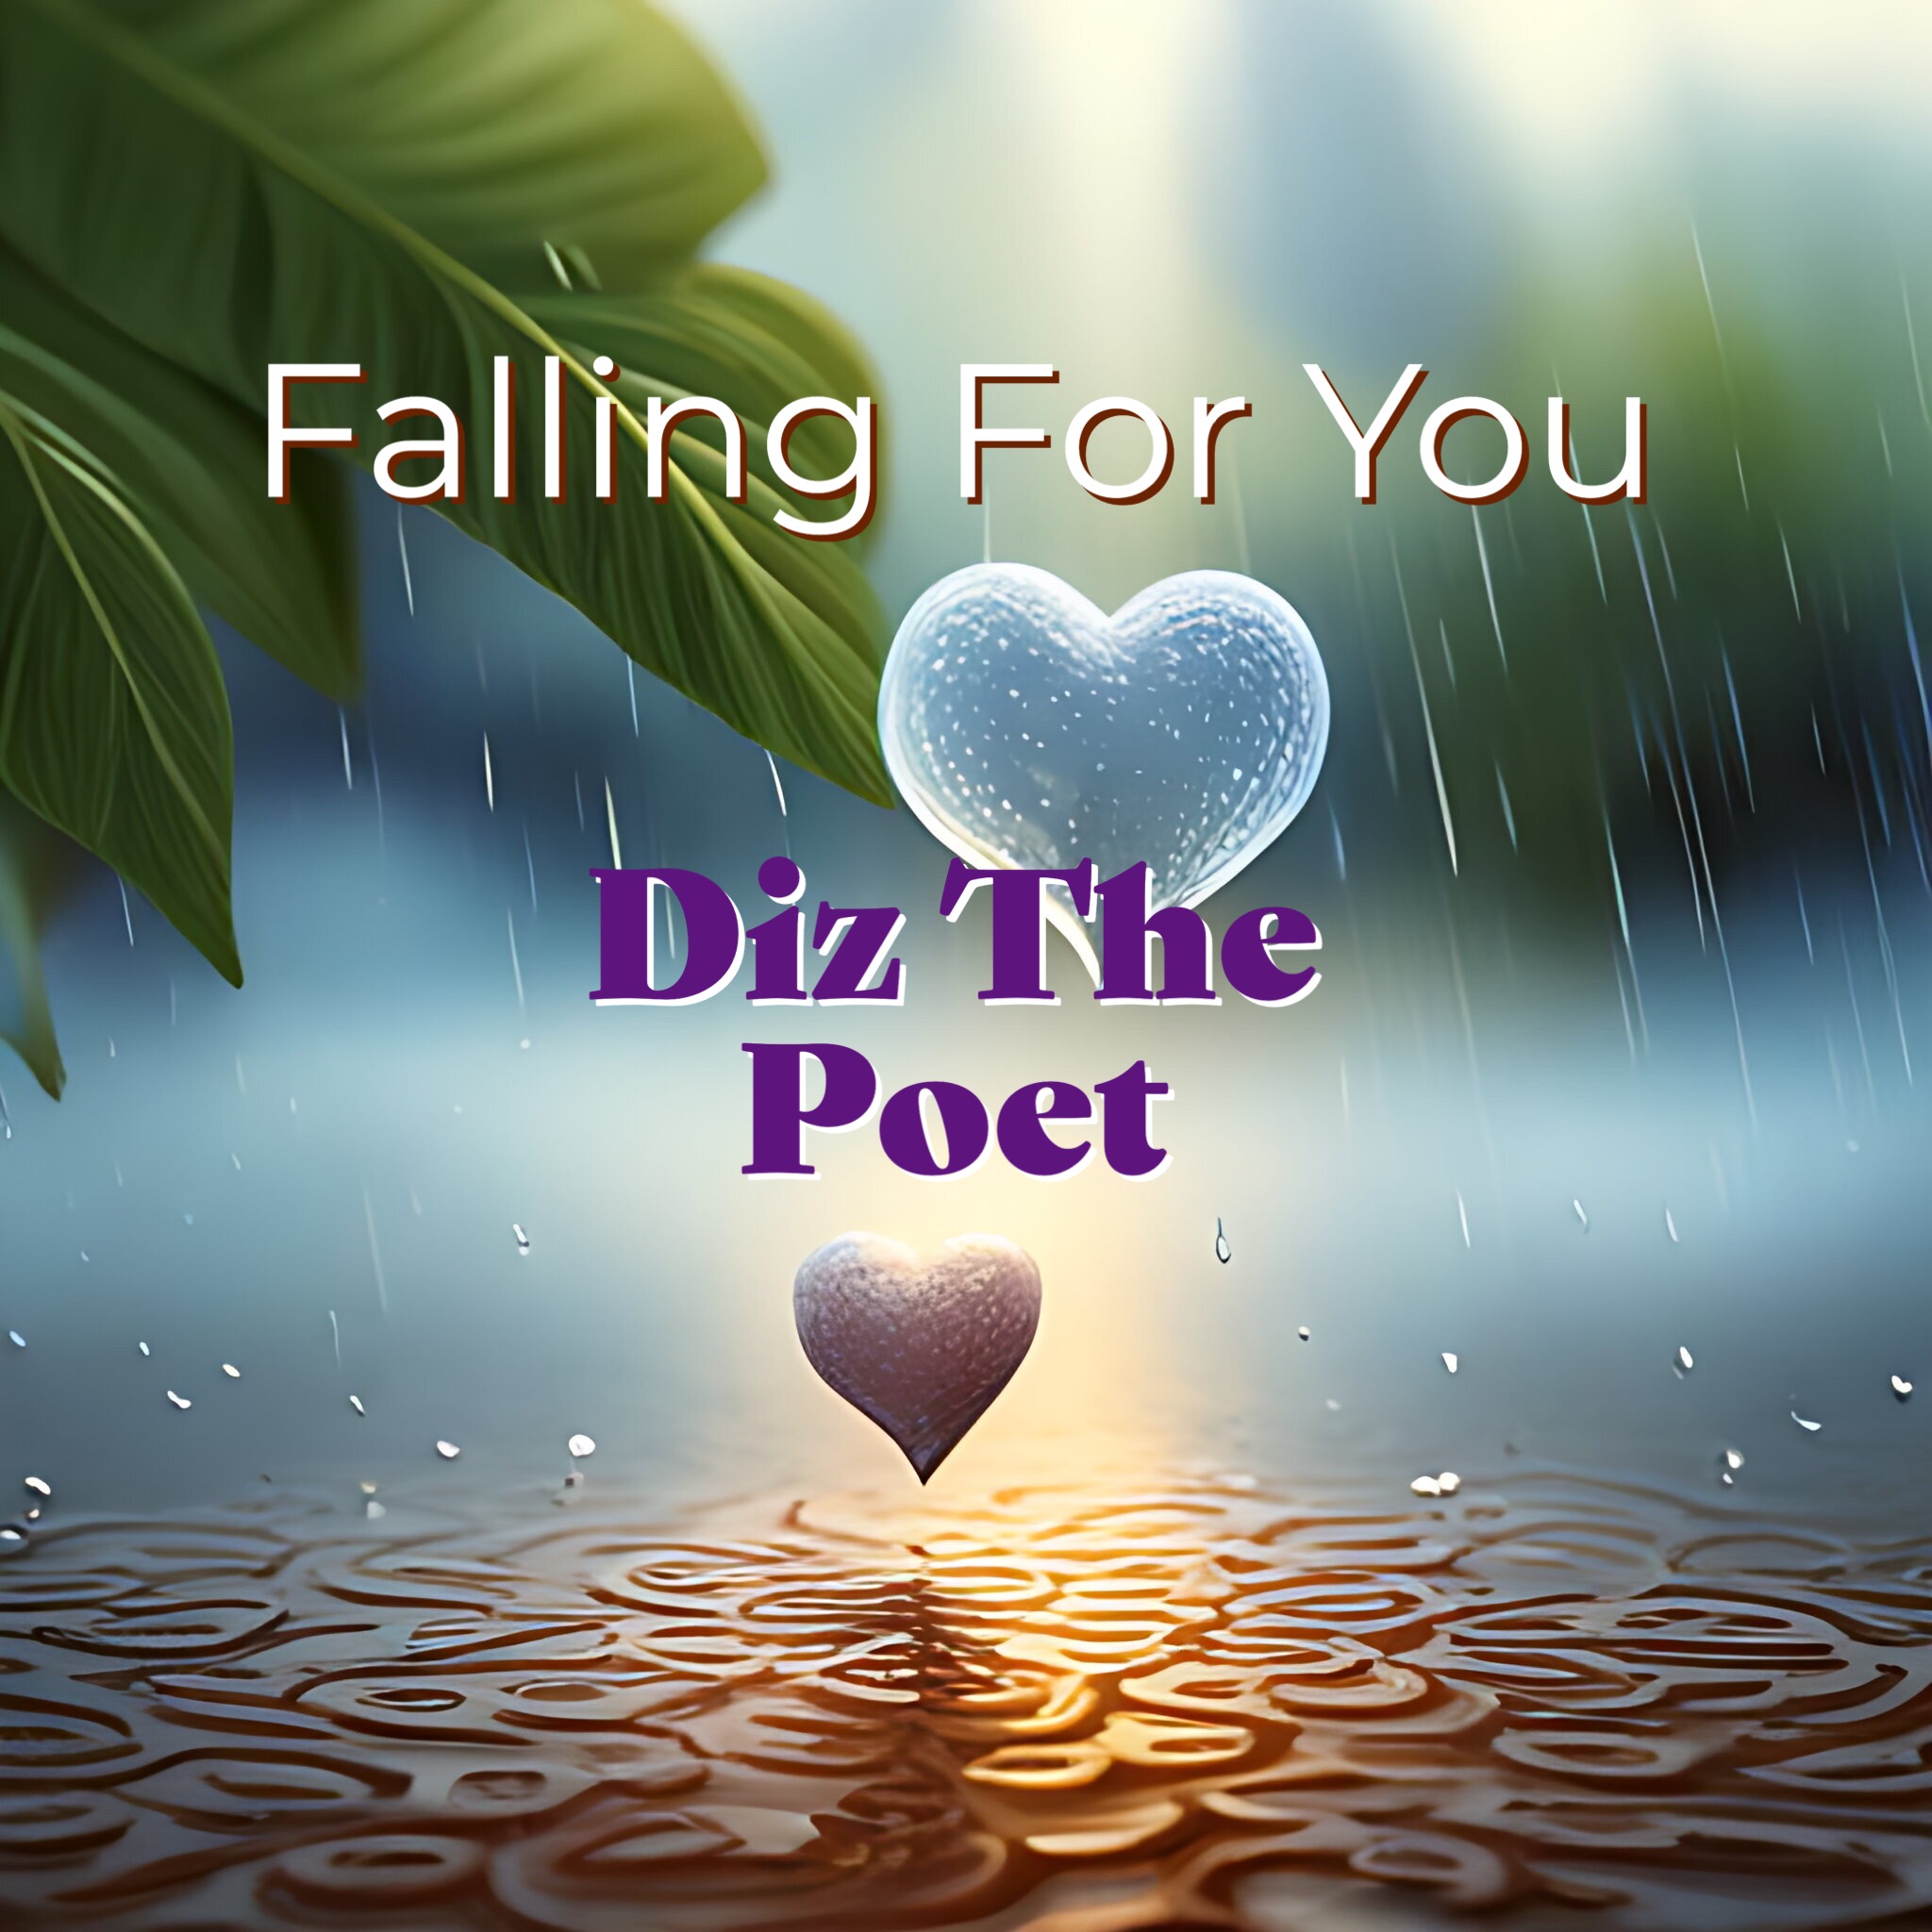 Art for Falling For You by Diz The Poet